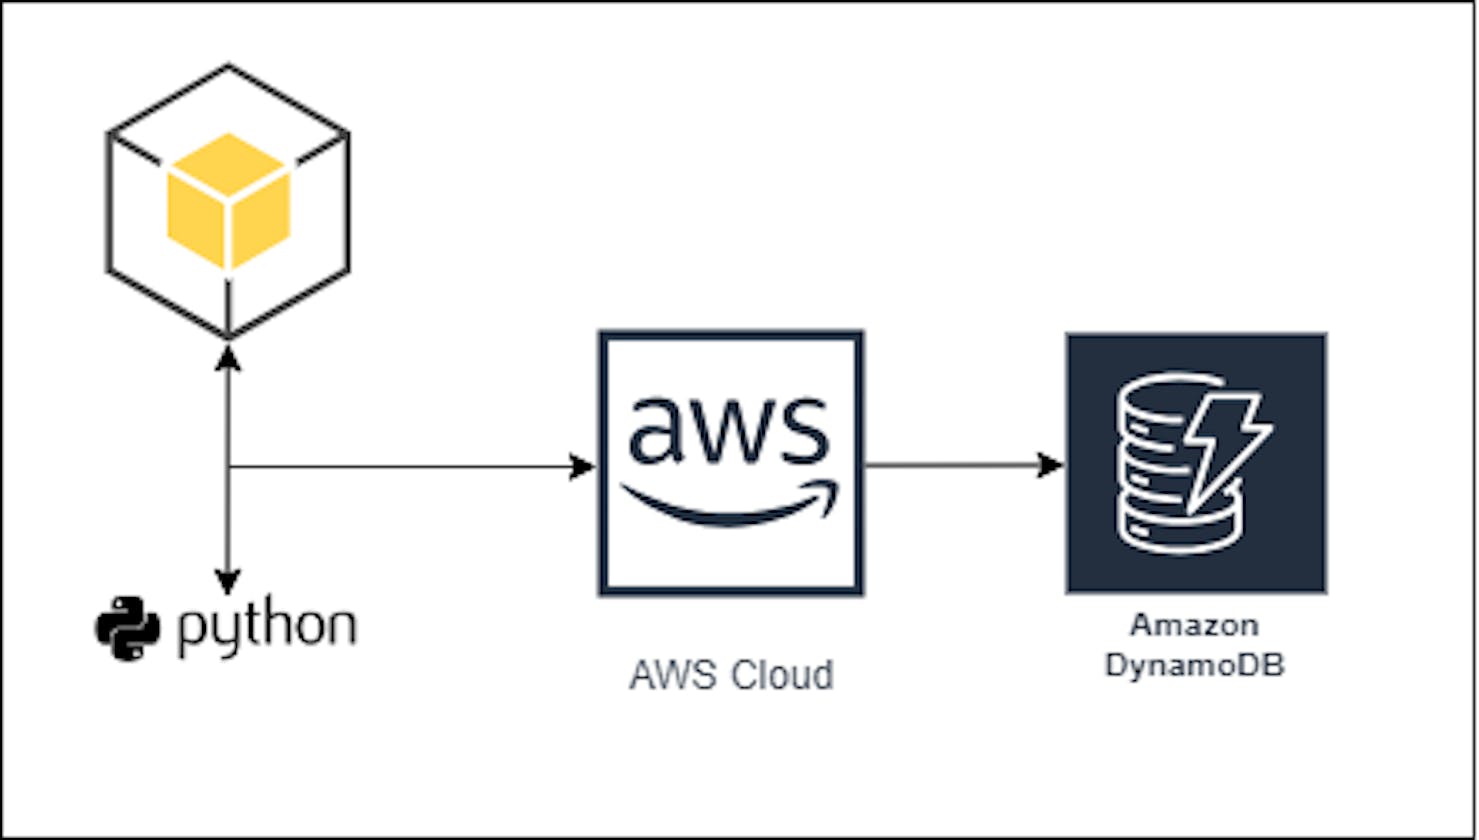 How to create an AWS DynamoDB database and add data using Python Boto3 library.